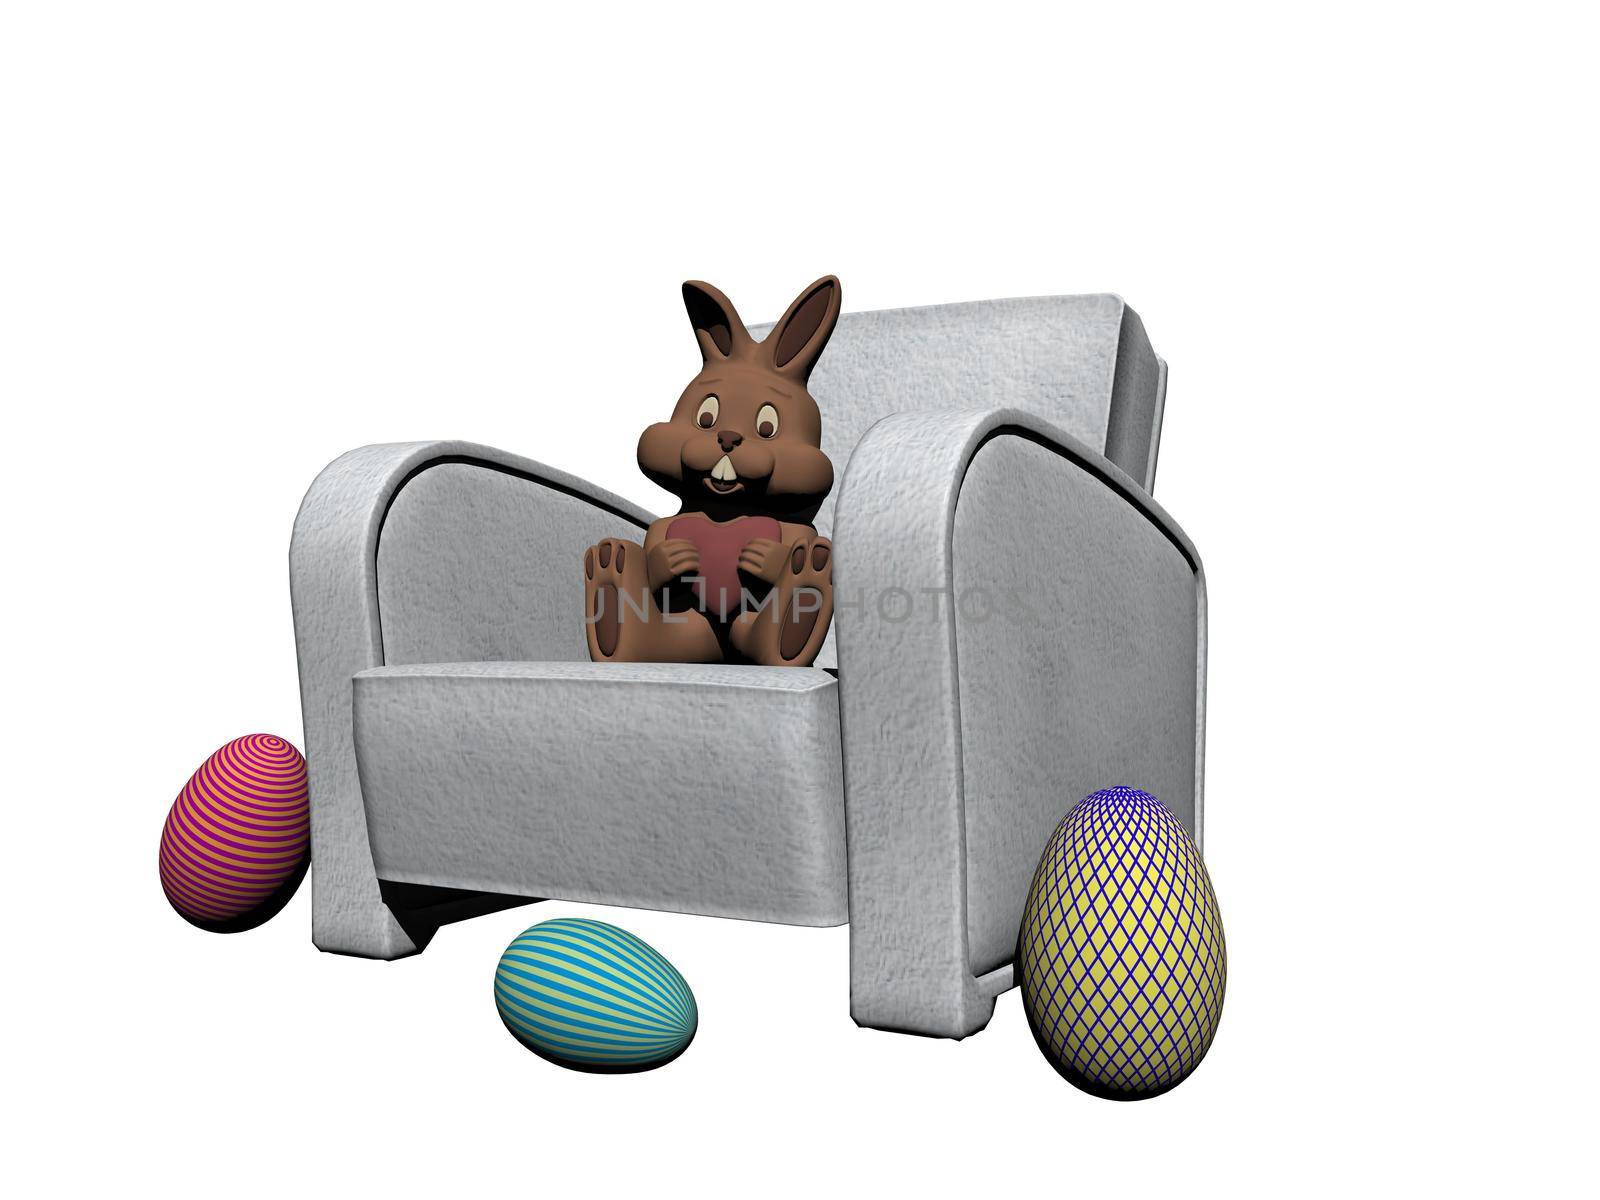 Bunny hugging an Easter egg - 3d rendering by mariephotos